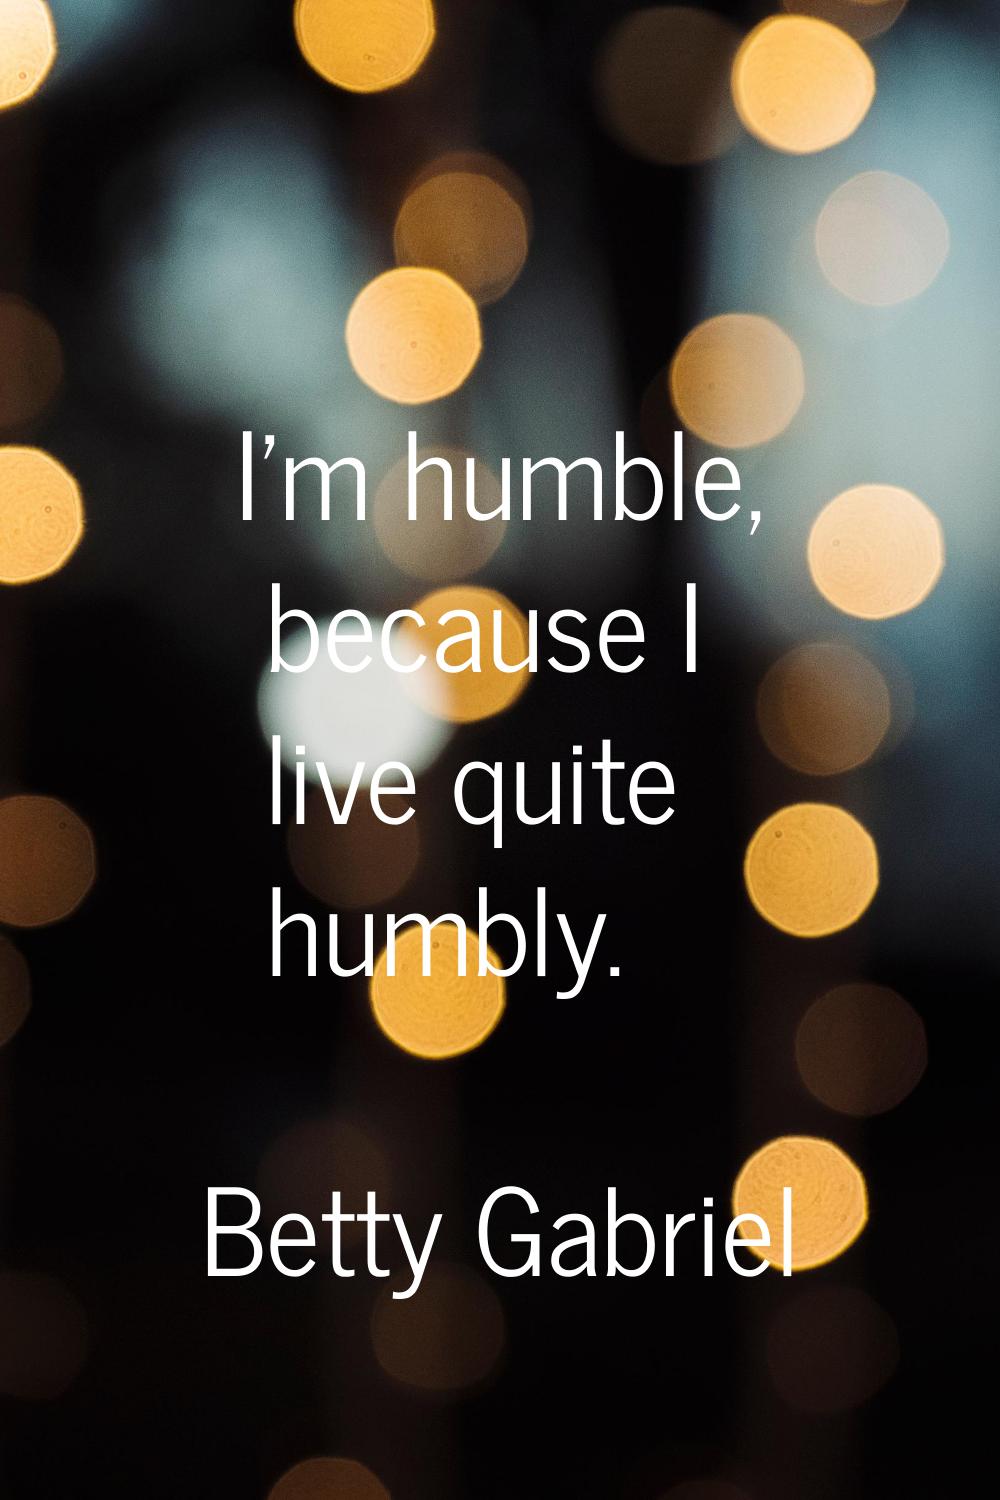 I'm humble, because I live quite humbly.